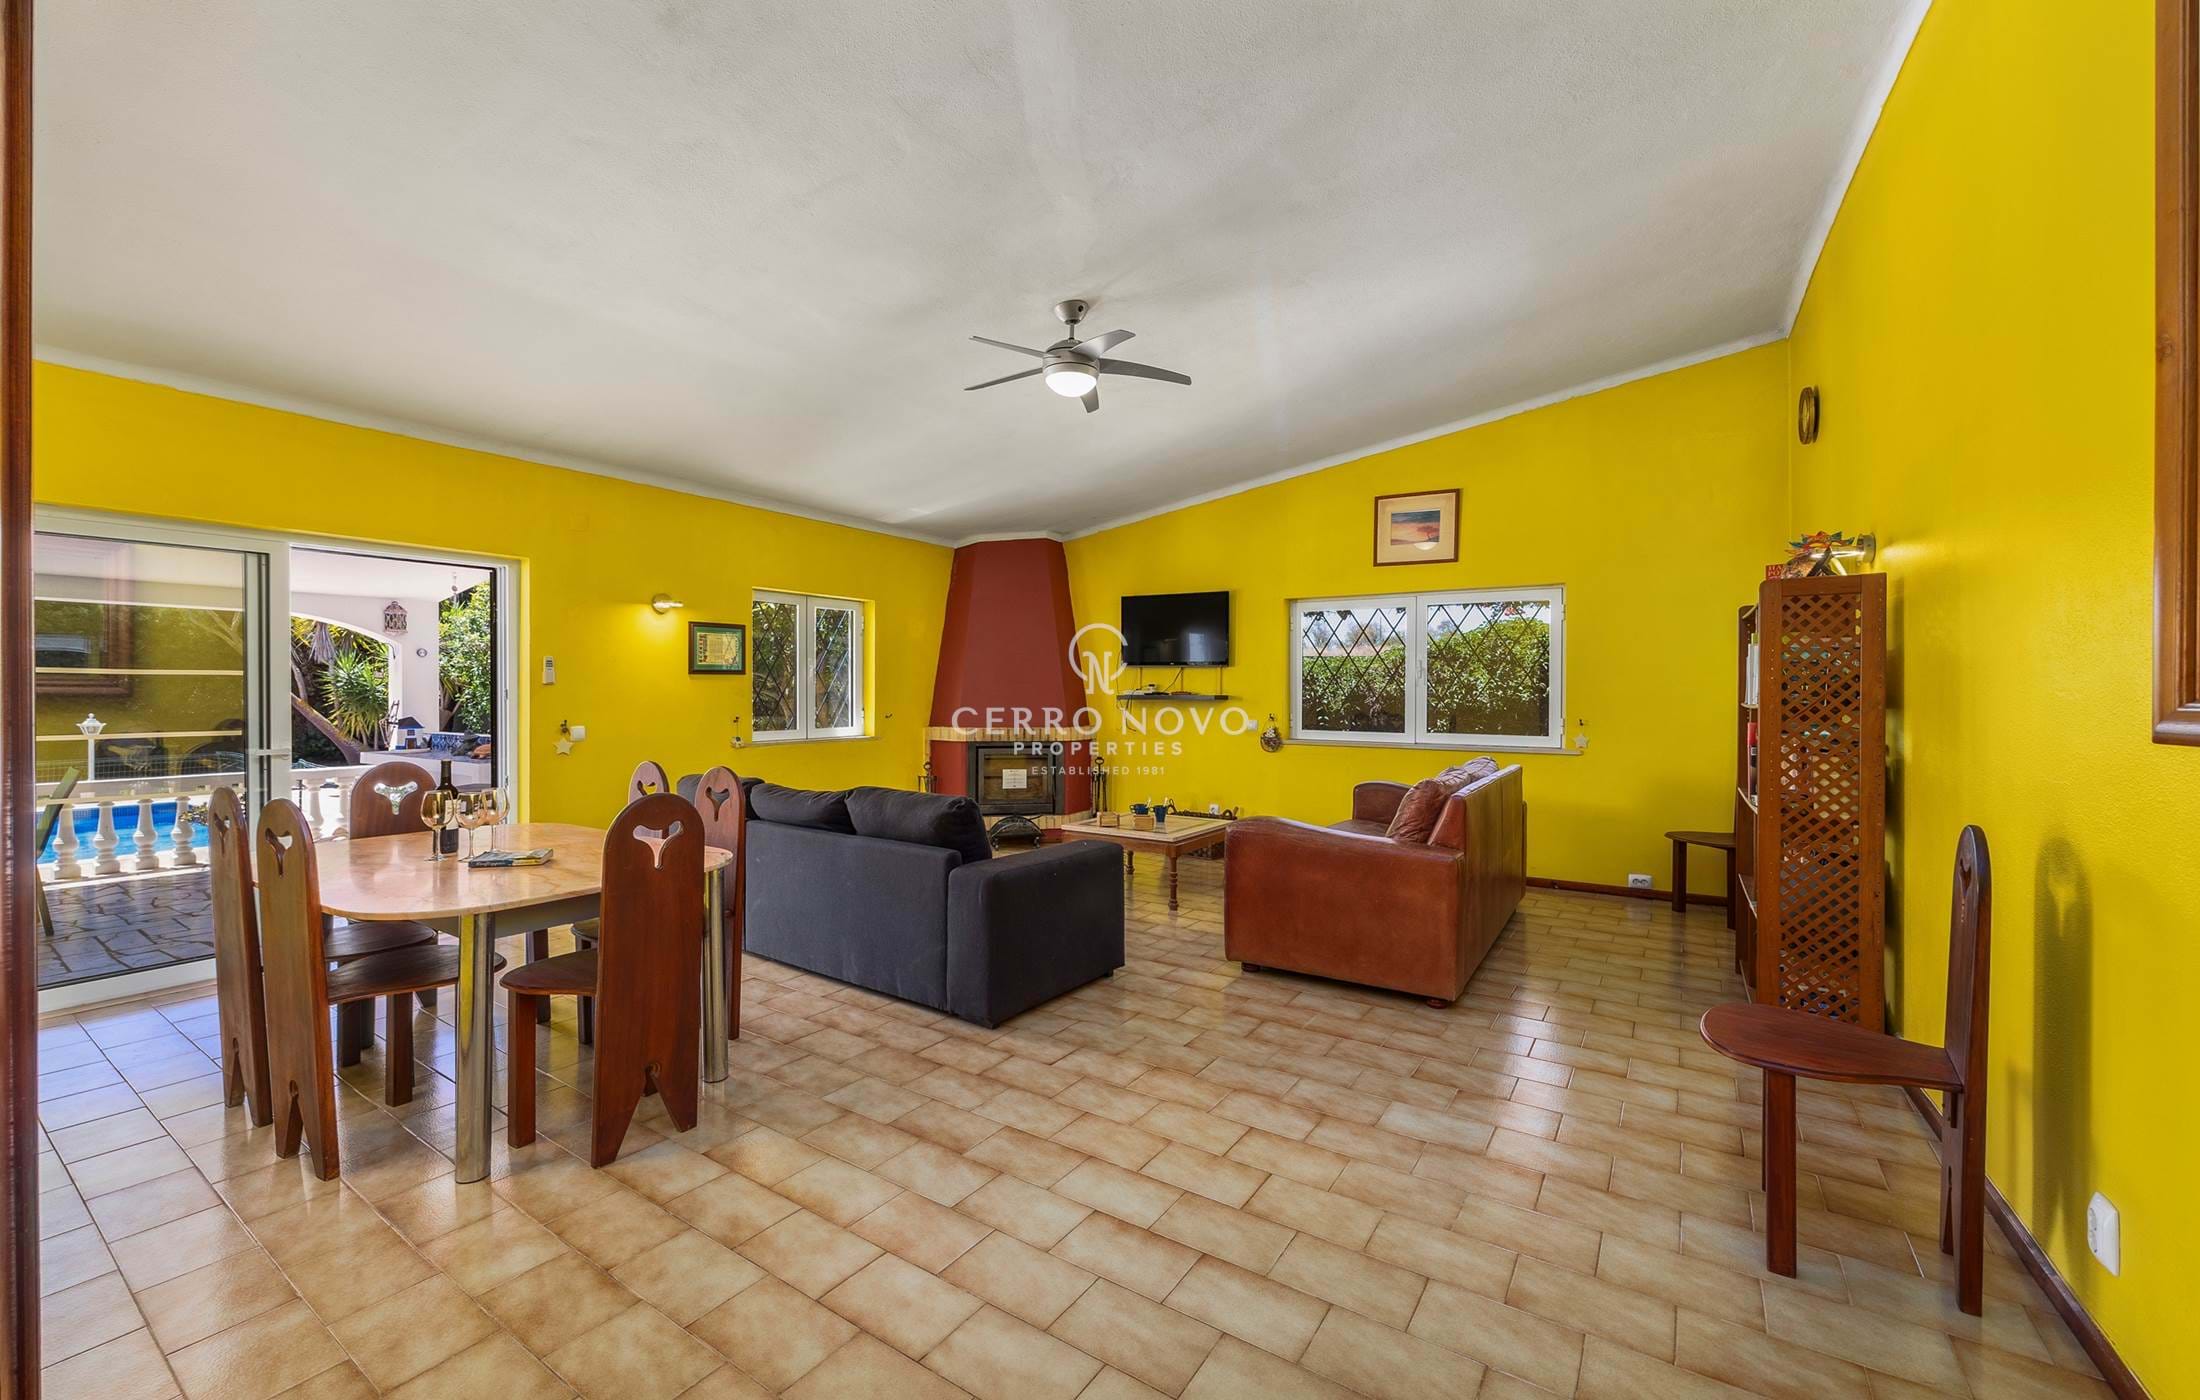 Large single storey traditional villa in a convenient and peaceful location